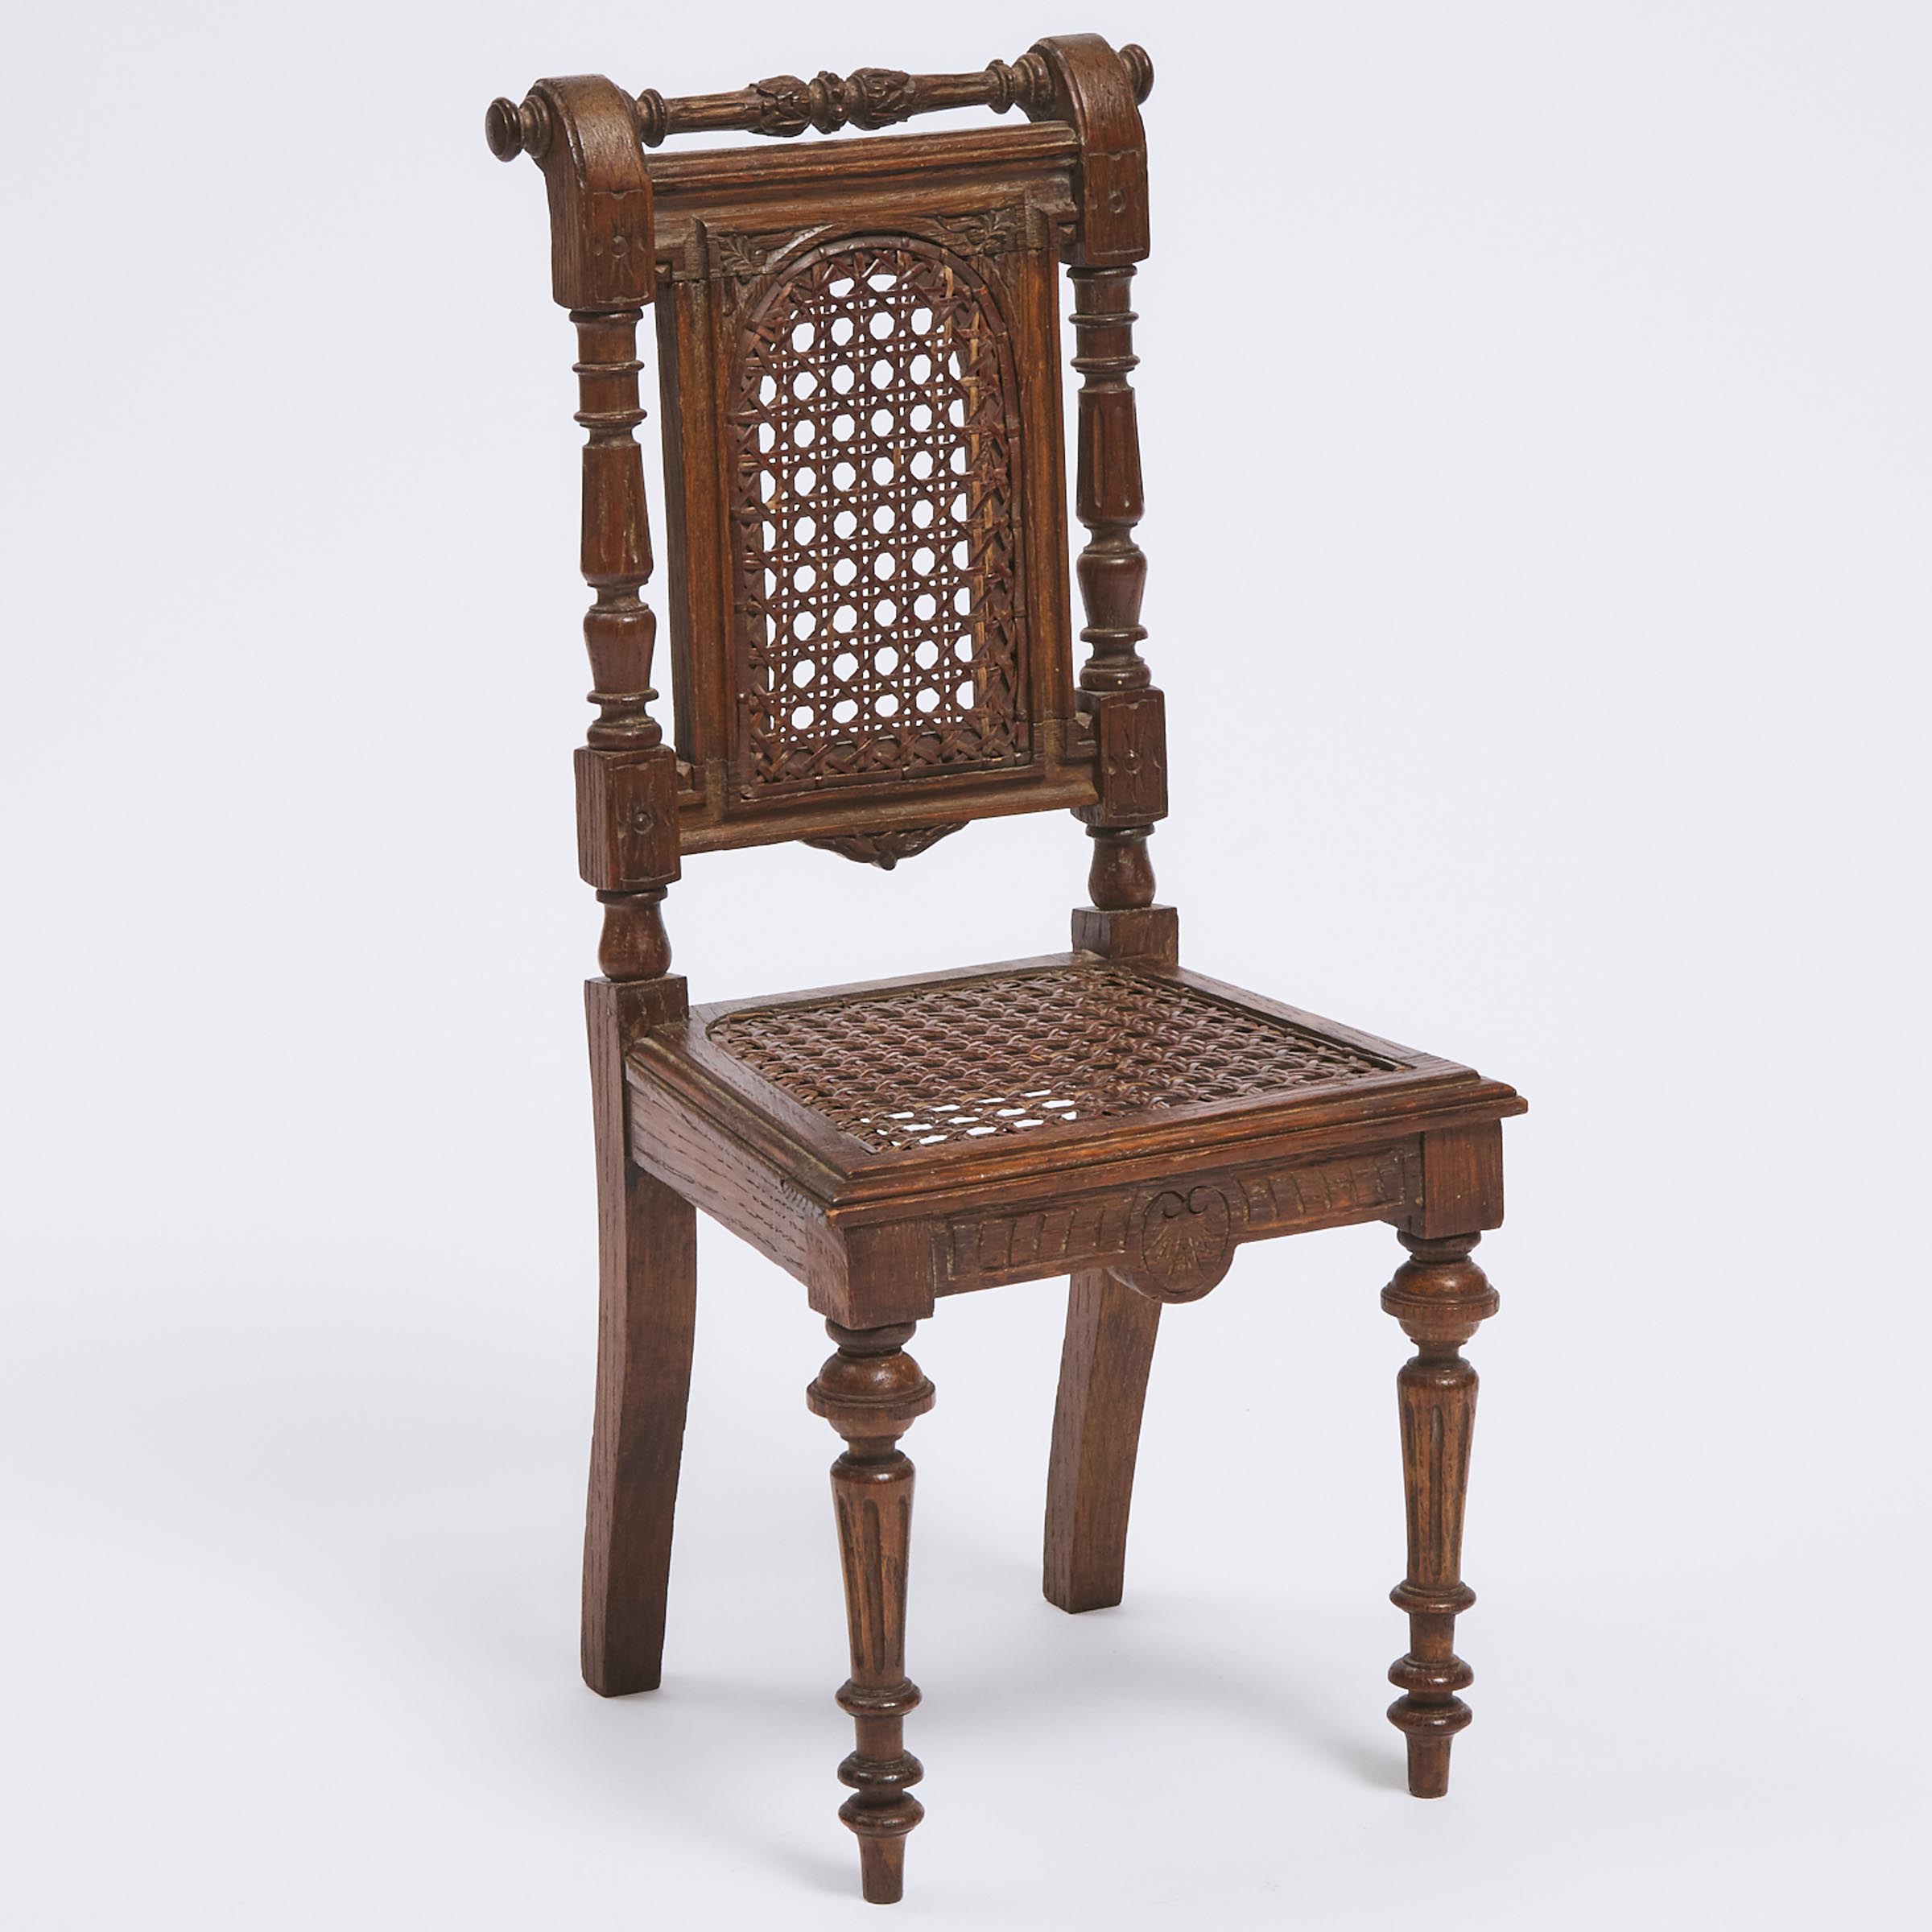 Victorian Carved and Caned Oak Miniature Model of a Side Chair, 19th century